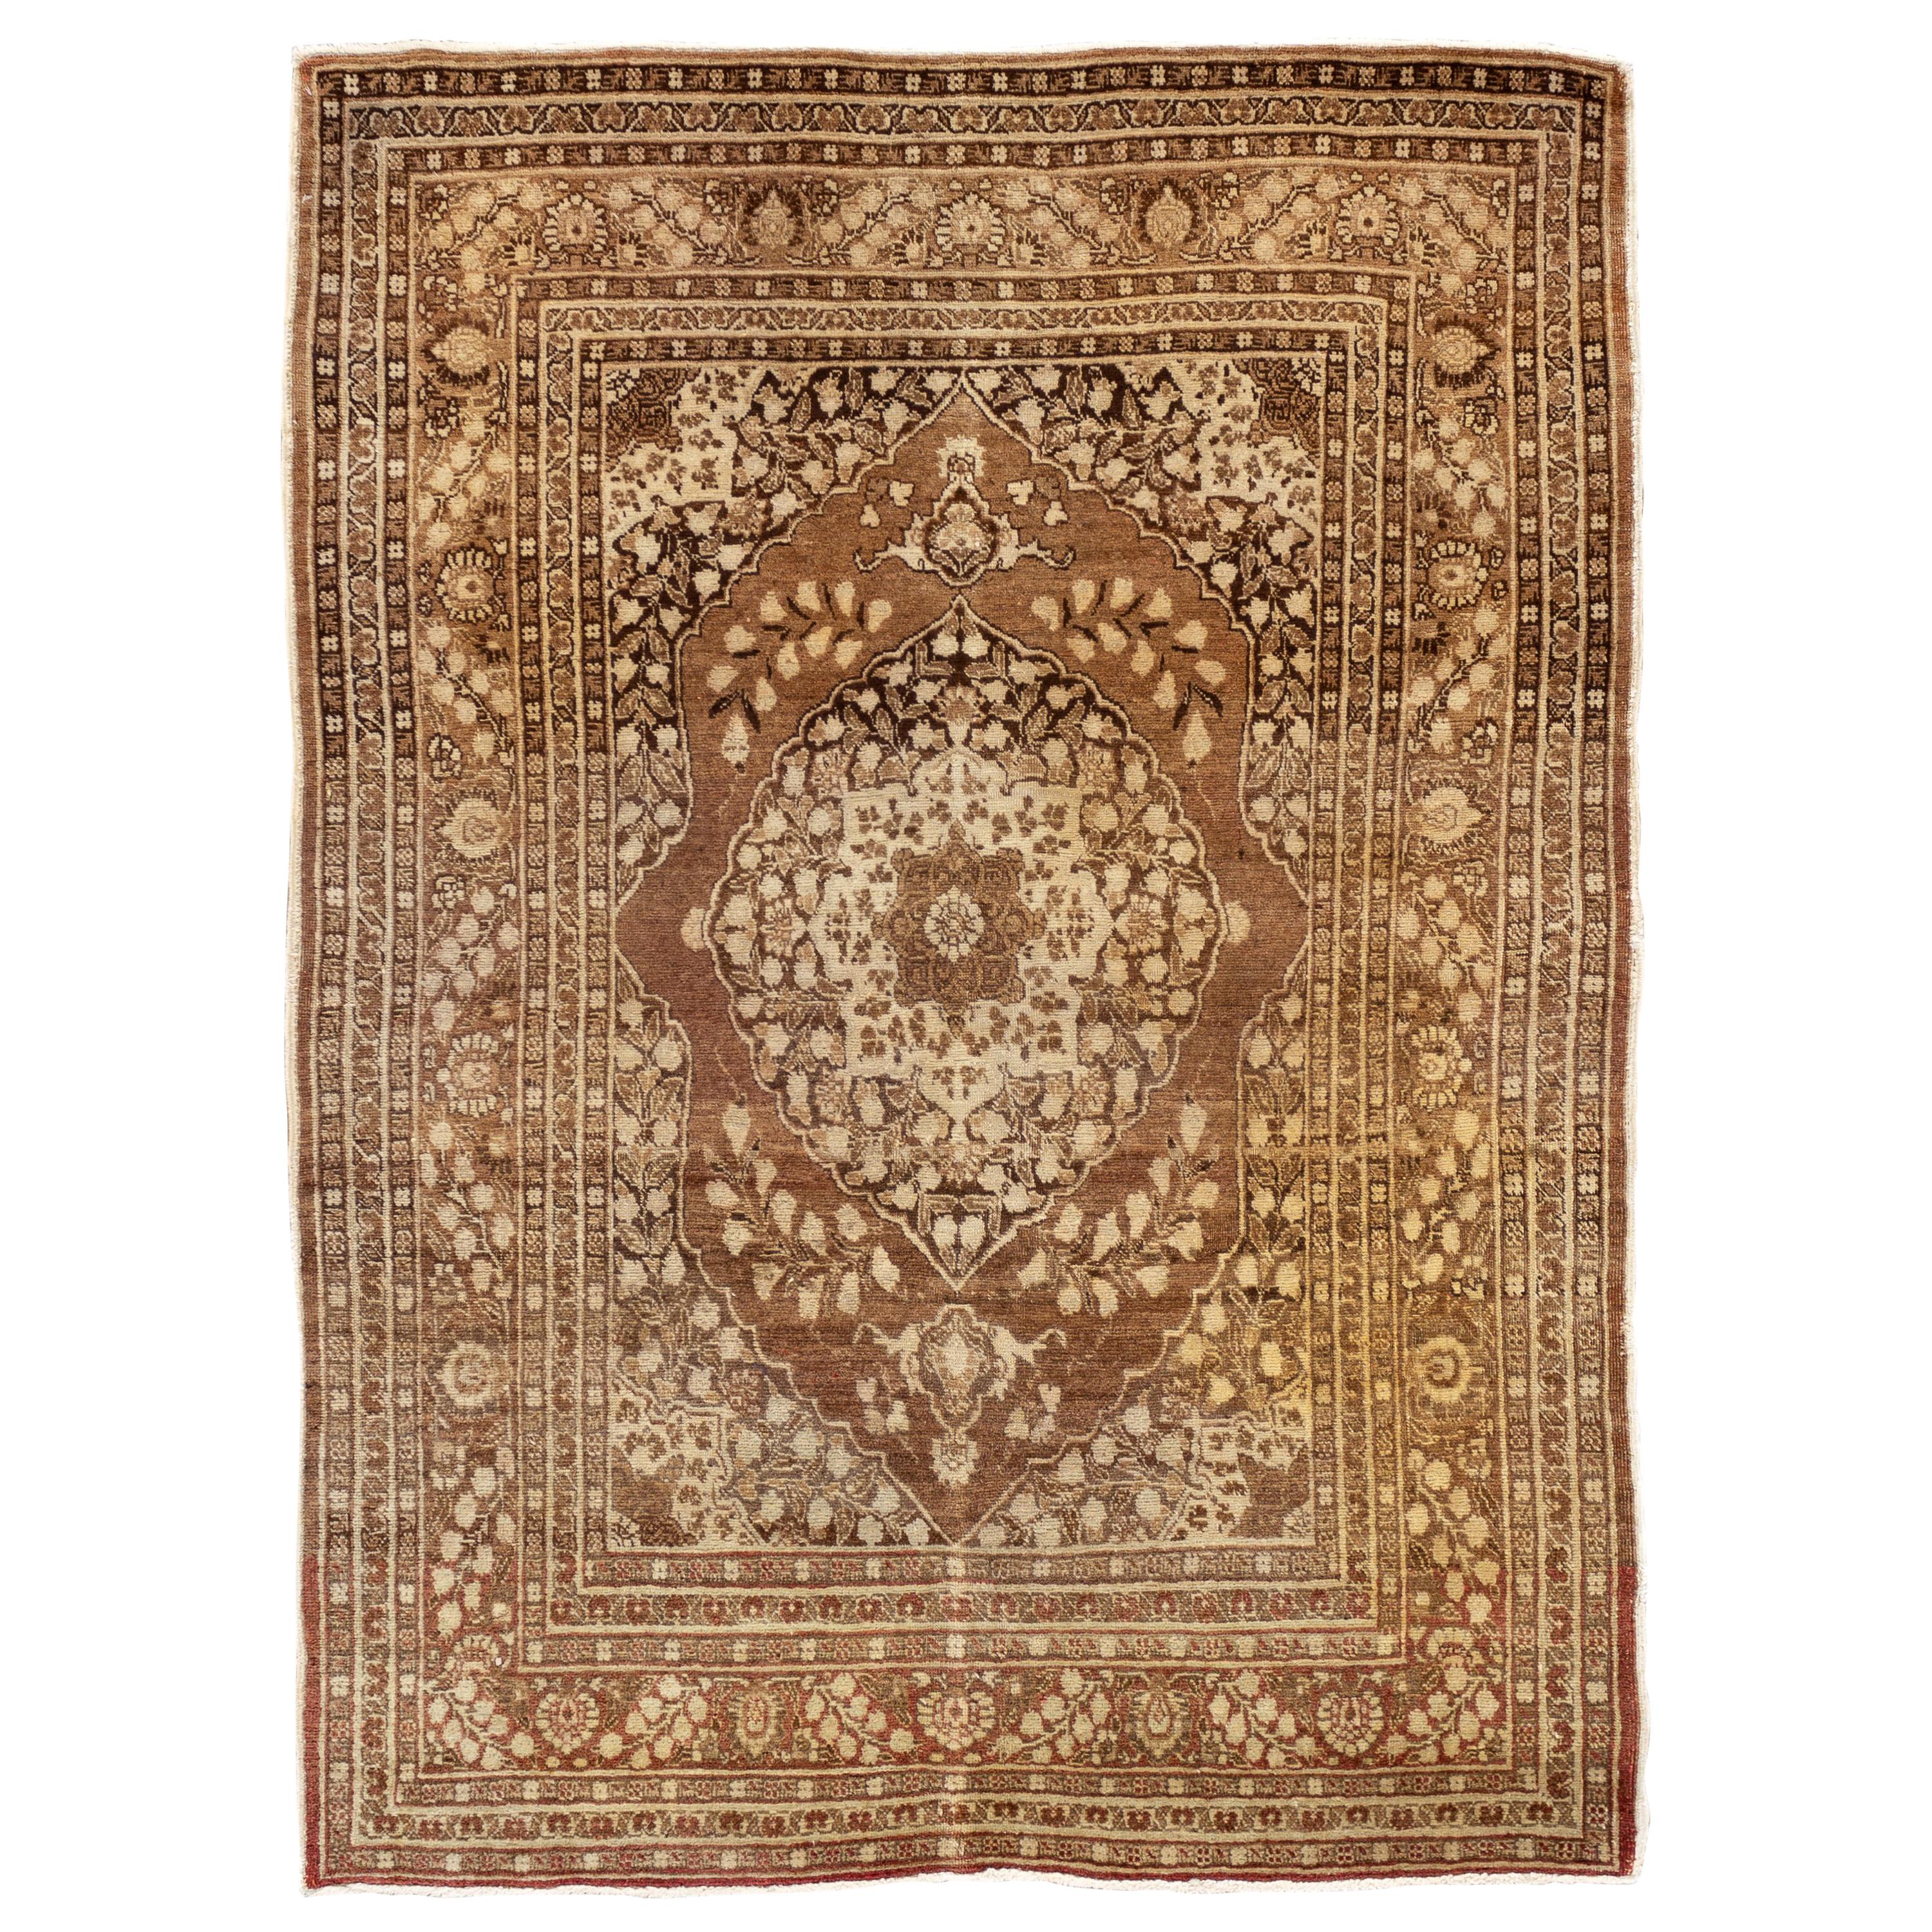 Early 20th Century Scatter Tabriz Rug